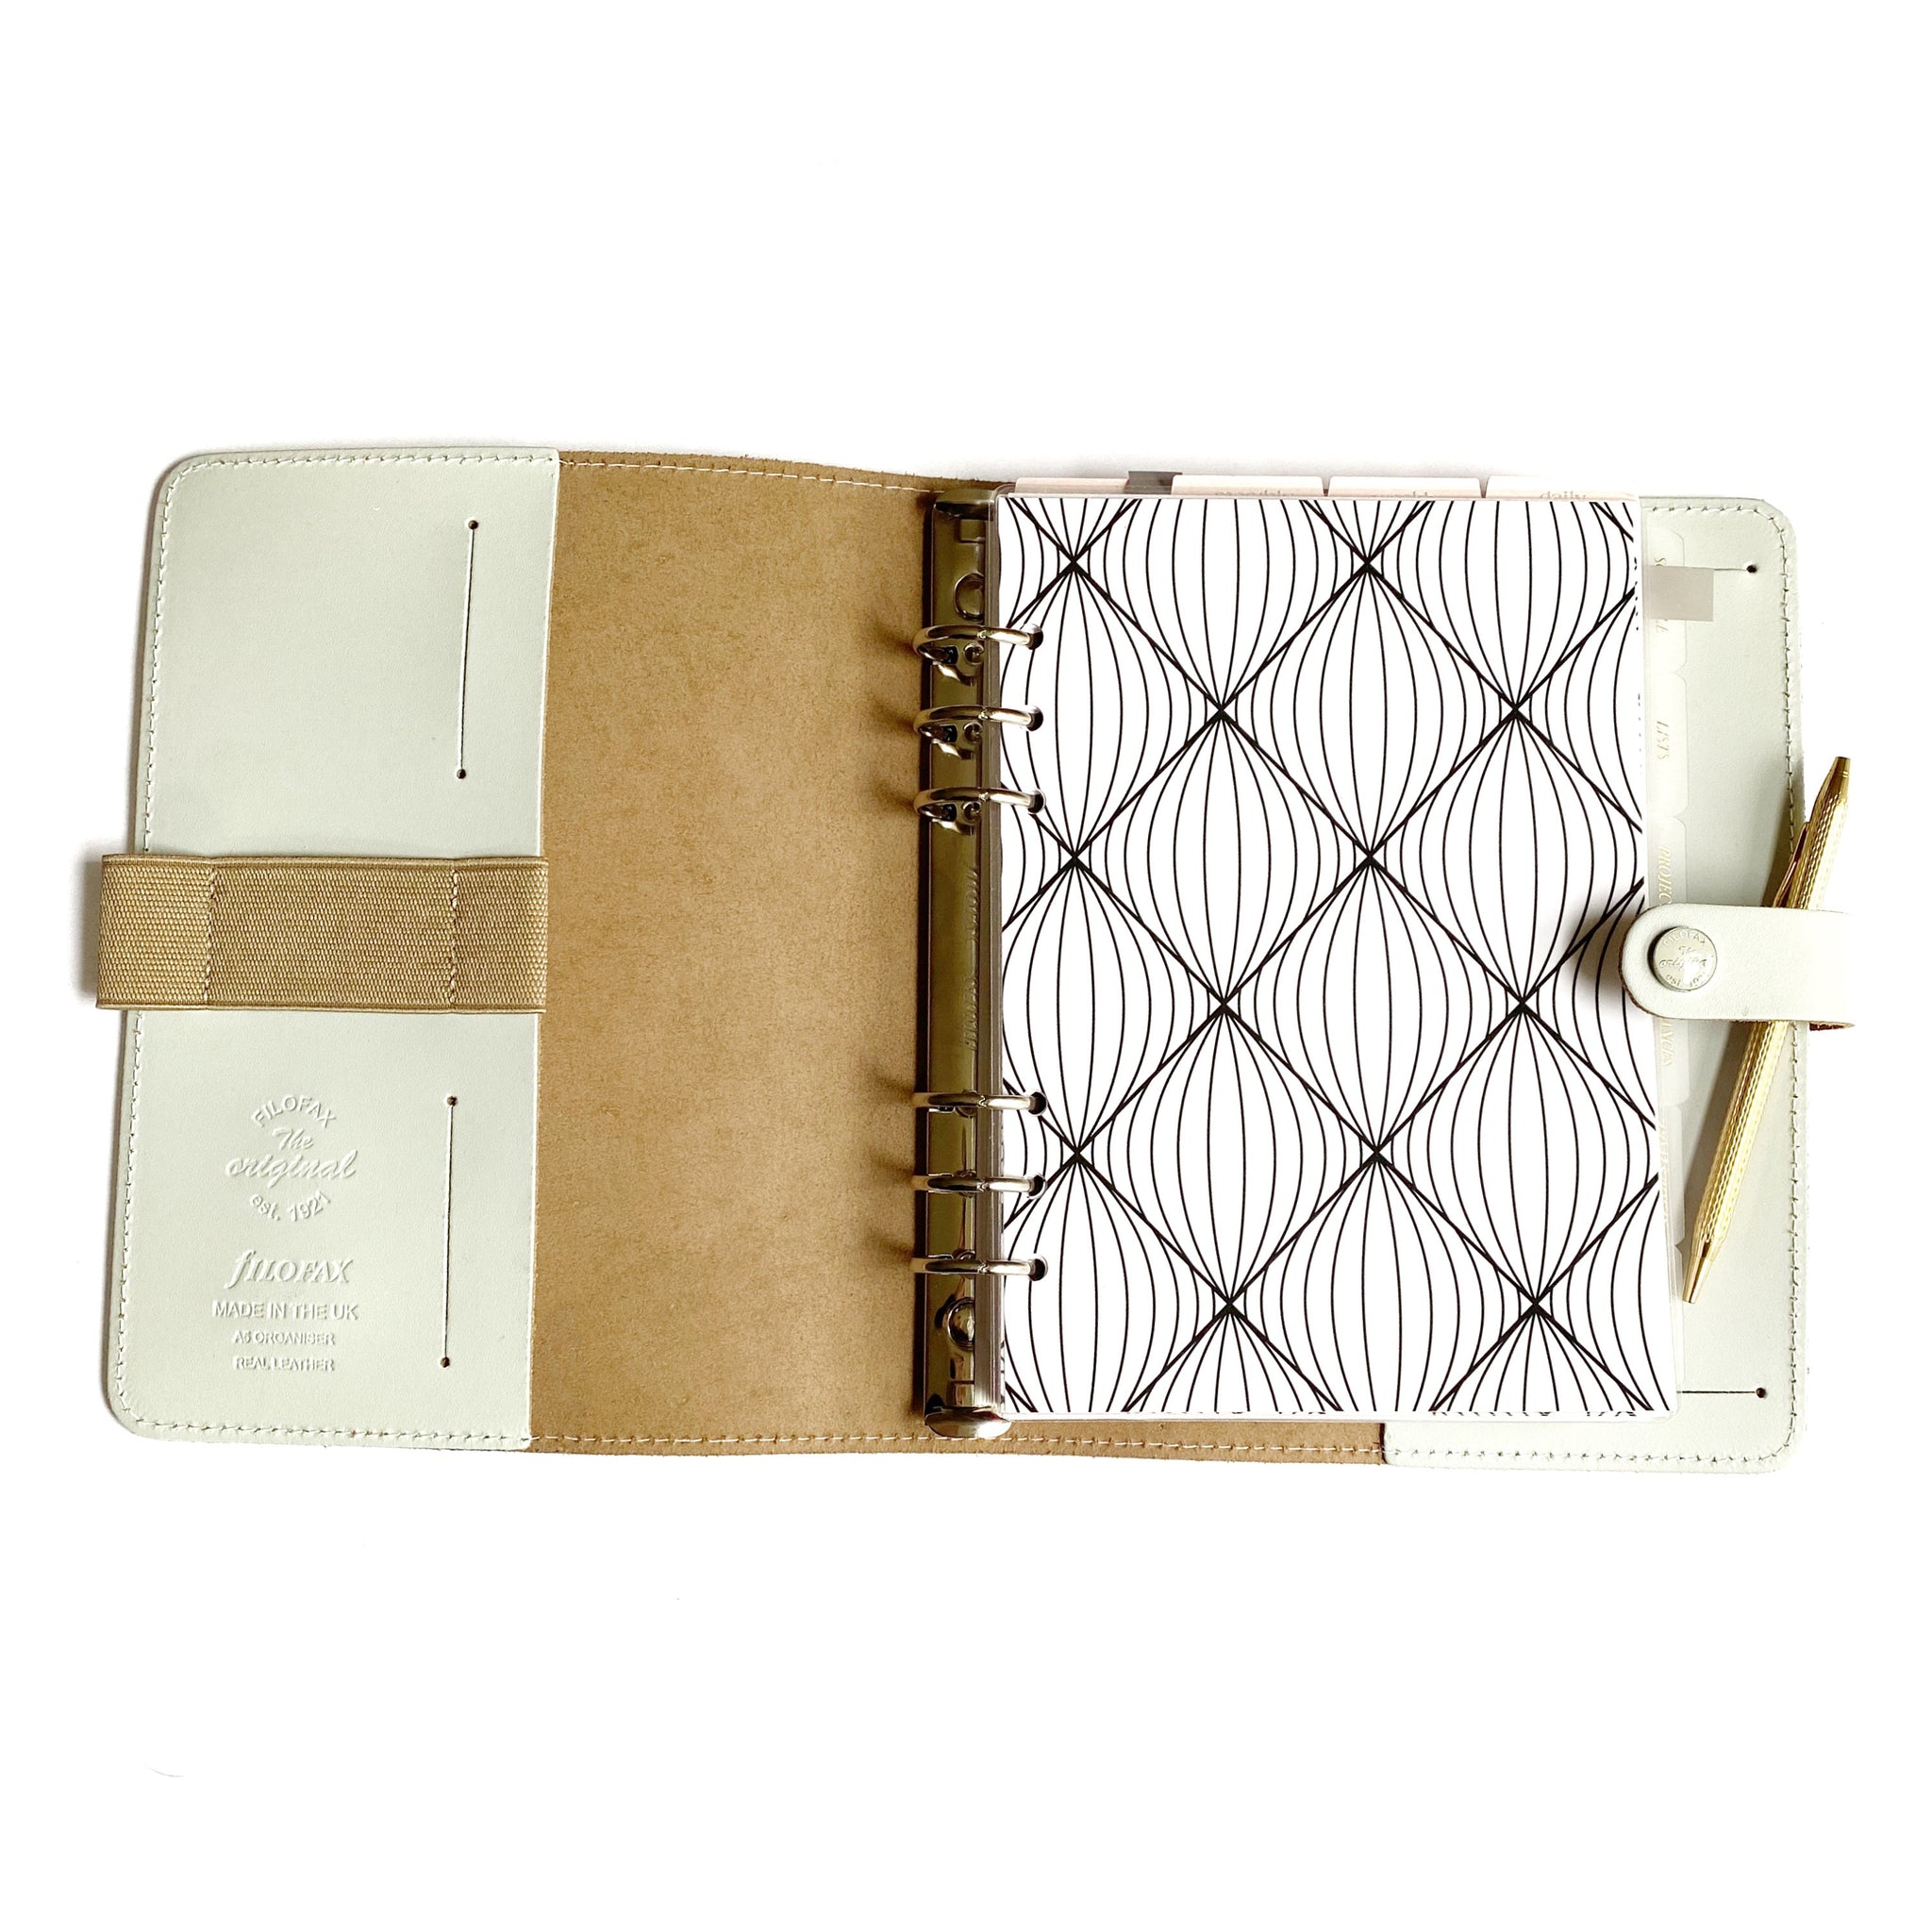 Black and White Wavy Geometric Minimal Planner Dashboard - East Street Paper Co.